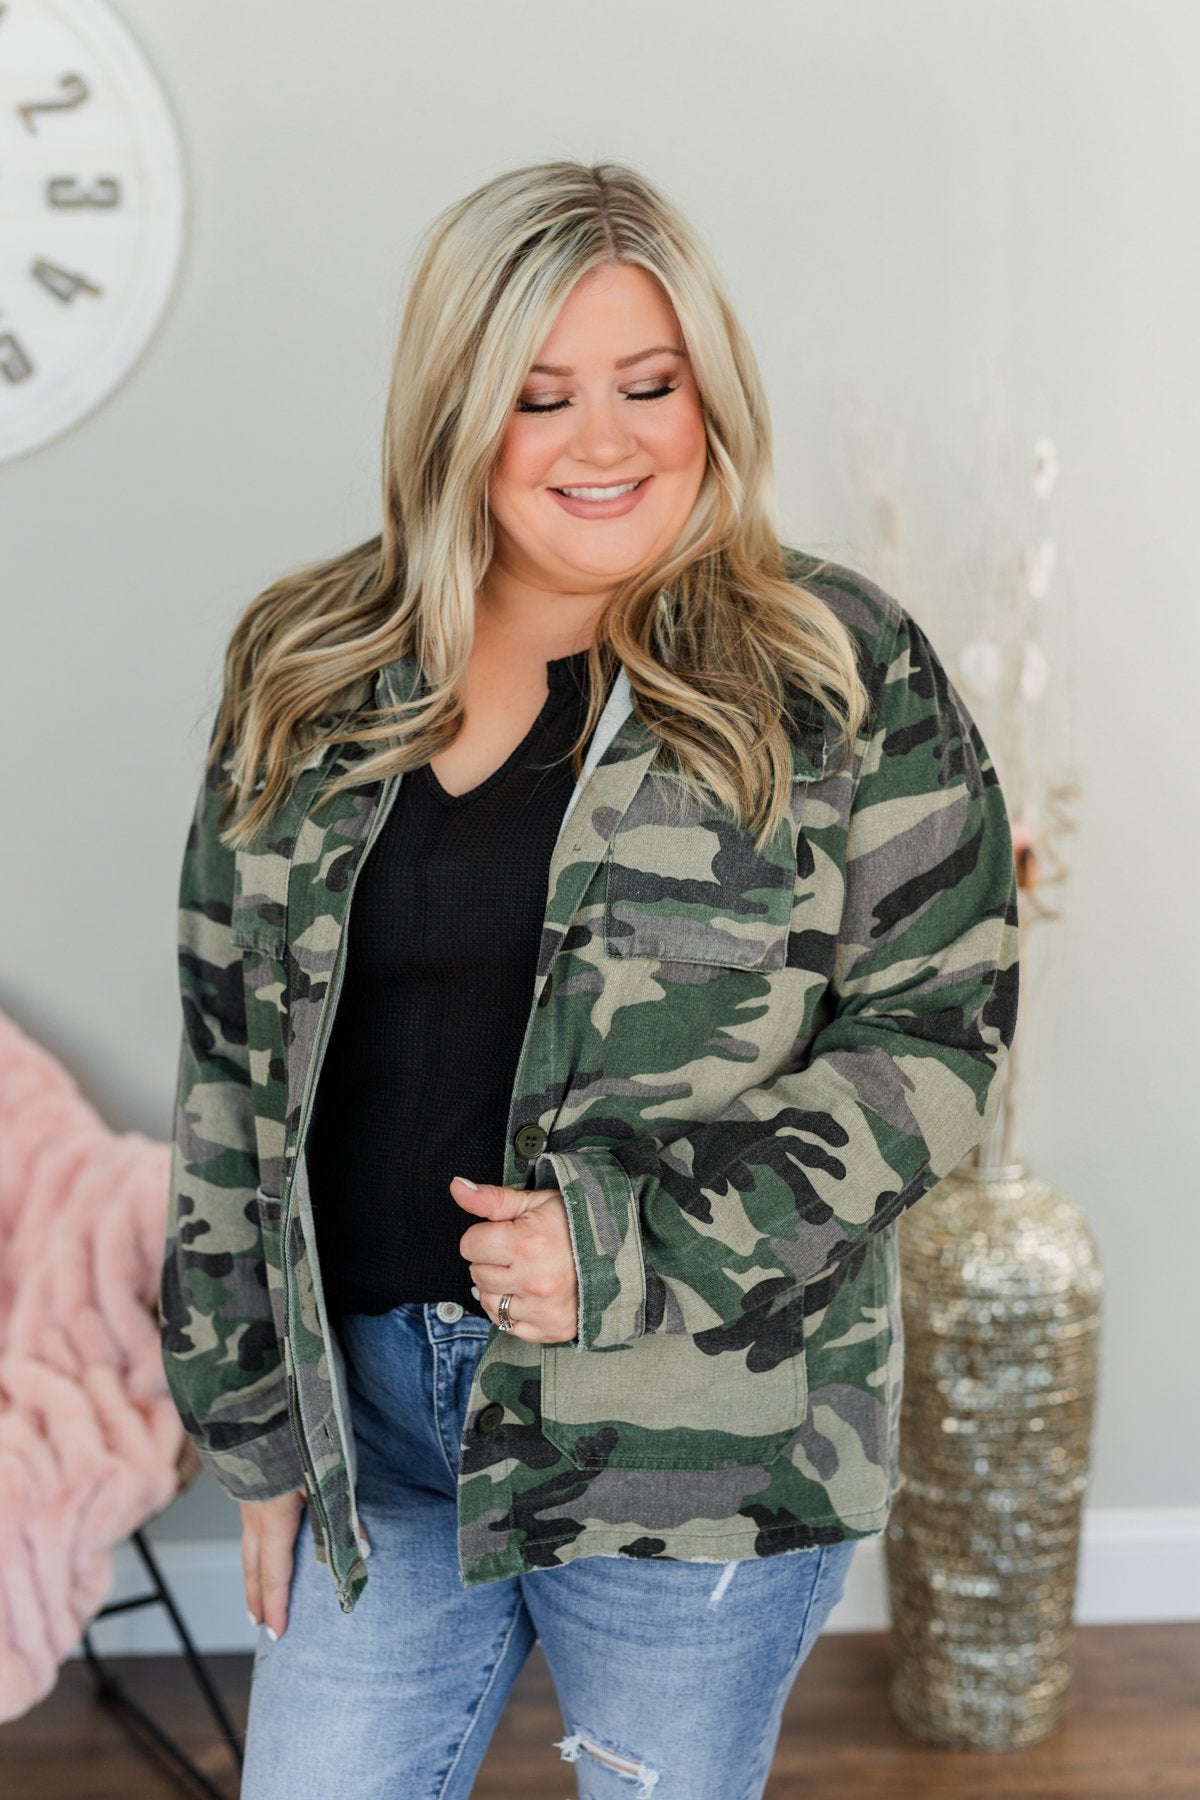 How To Wear Camouflage In The Spring » IslandChic77 by Kelly W.